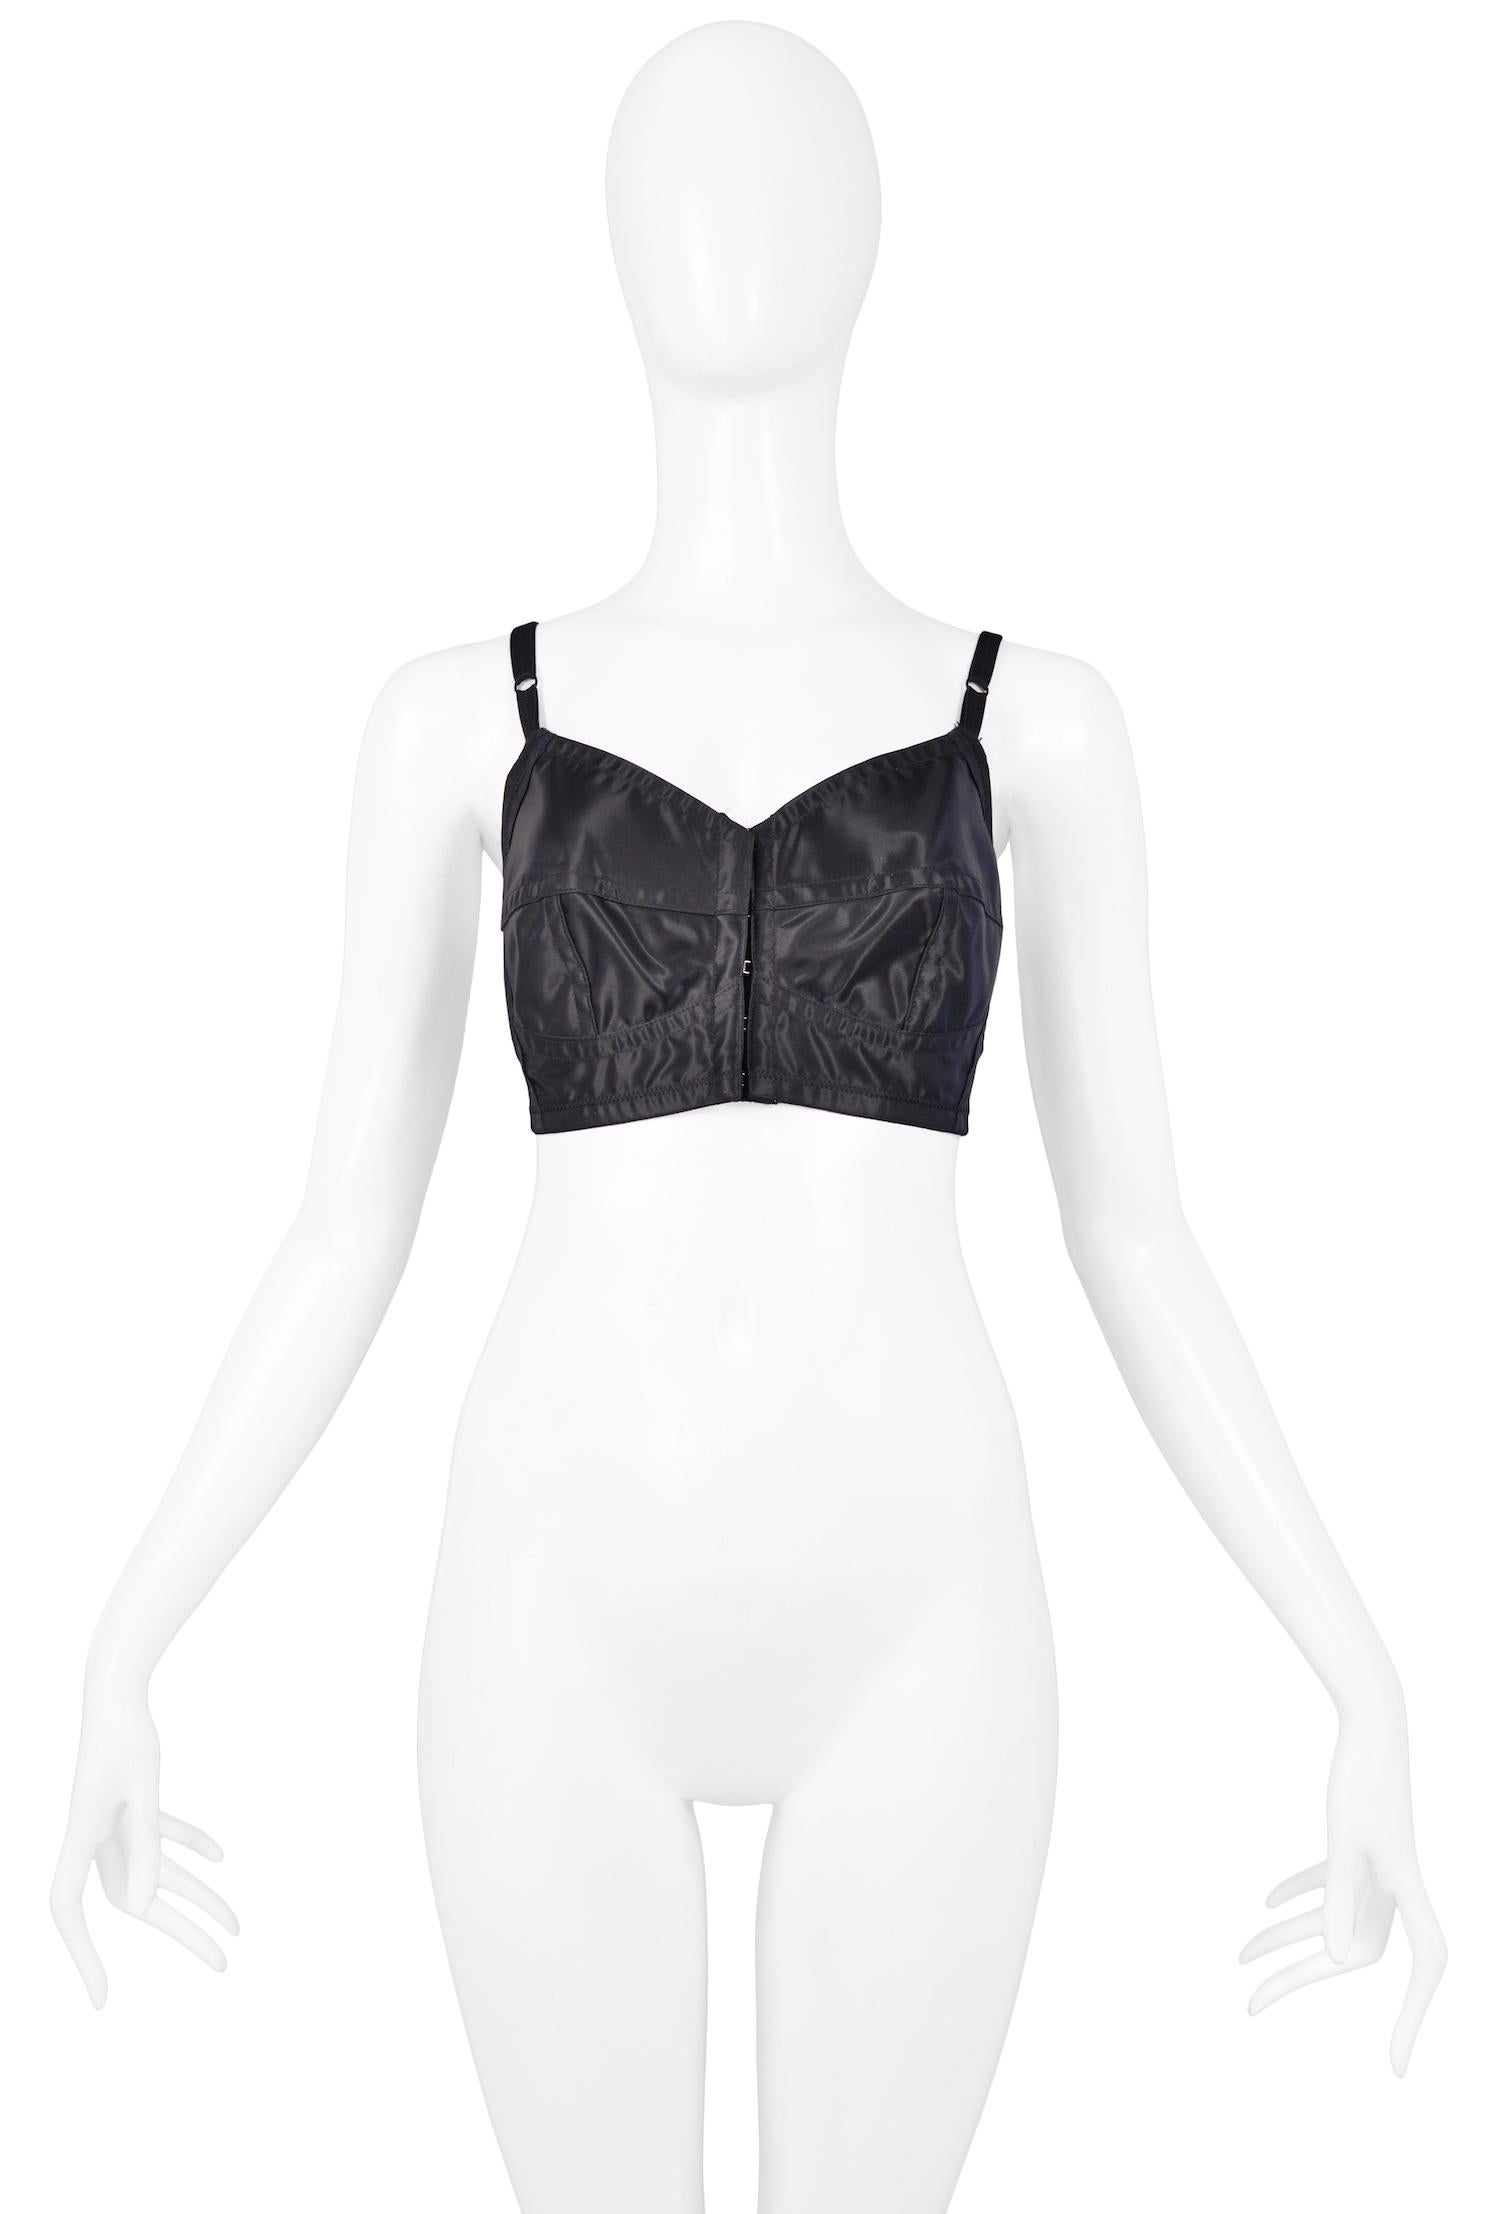 Vintage Complice black satin woven bustier bra top featuring hook and eye closure at front, adjustable straps, and low back. 

Excellent Vintage Condition.

Size: Italian 44
